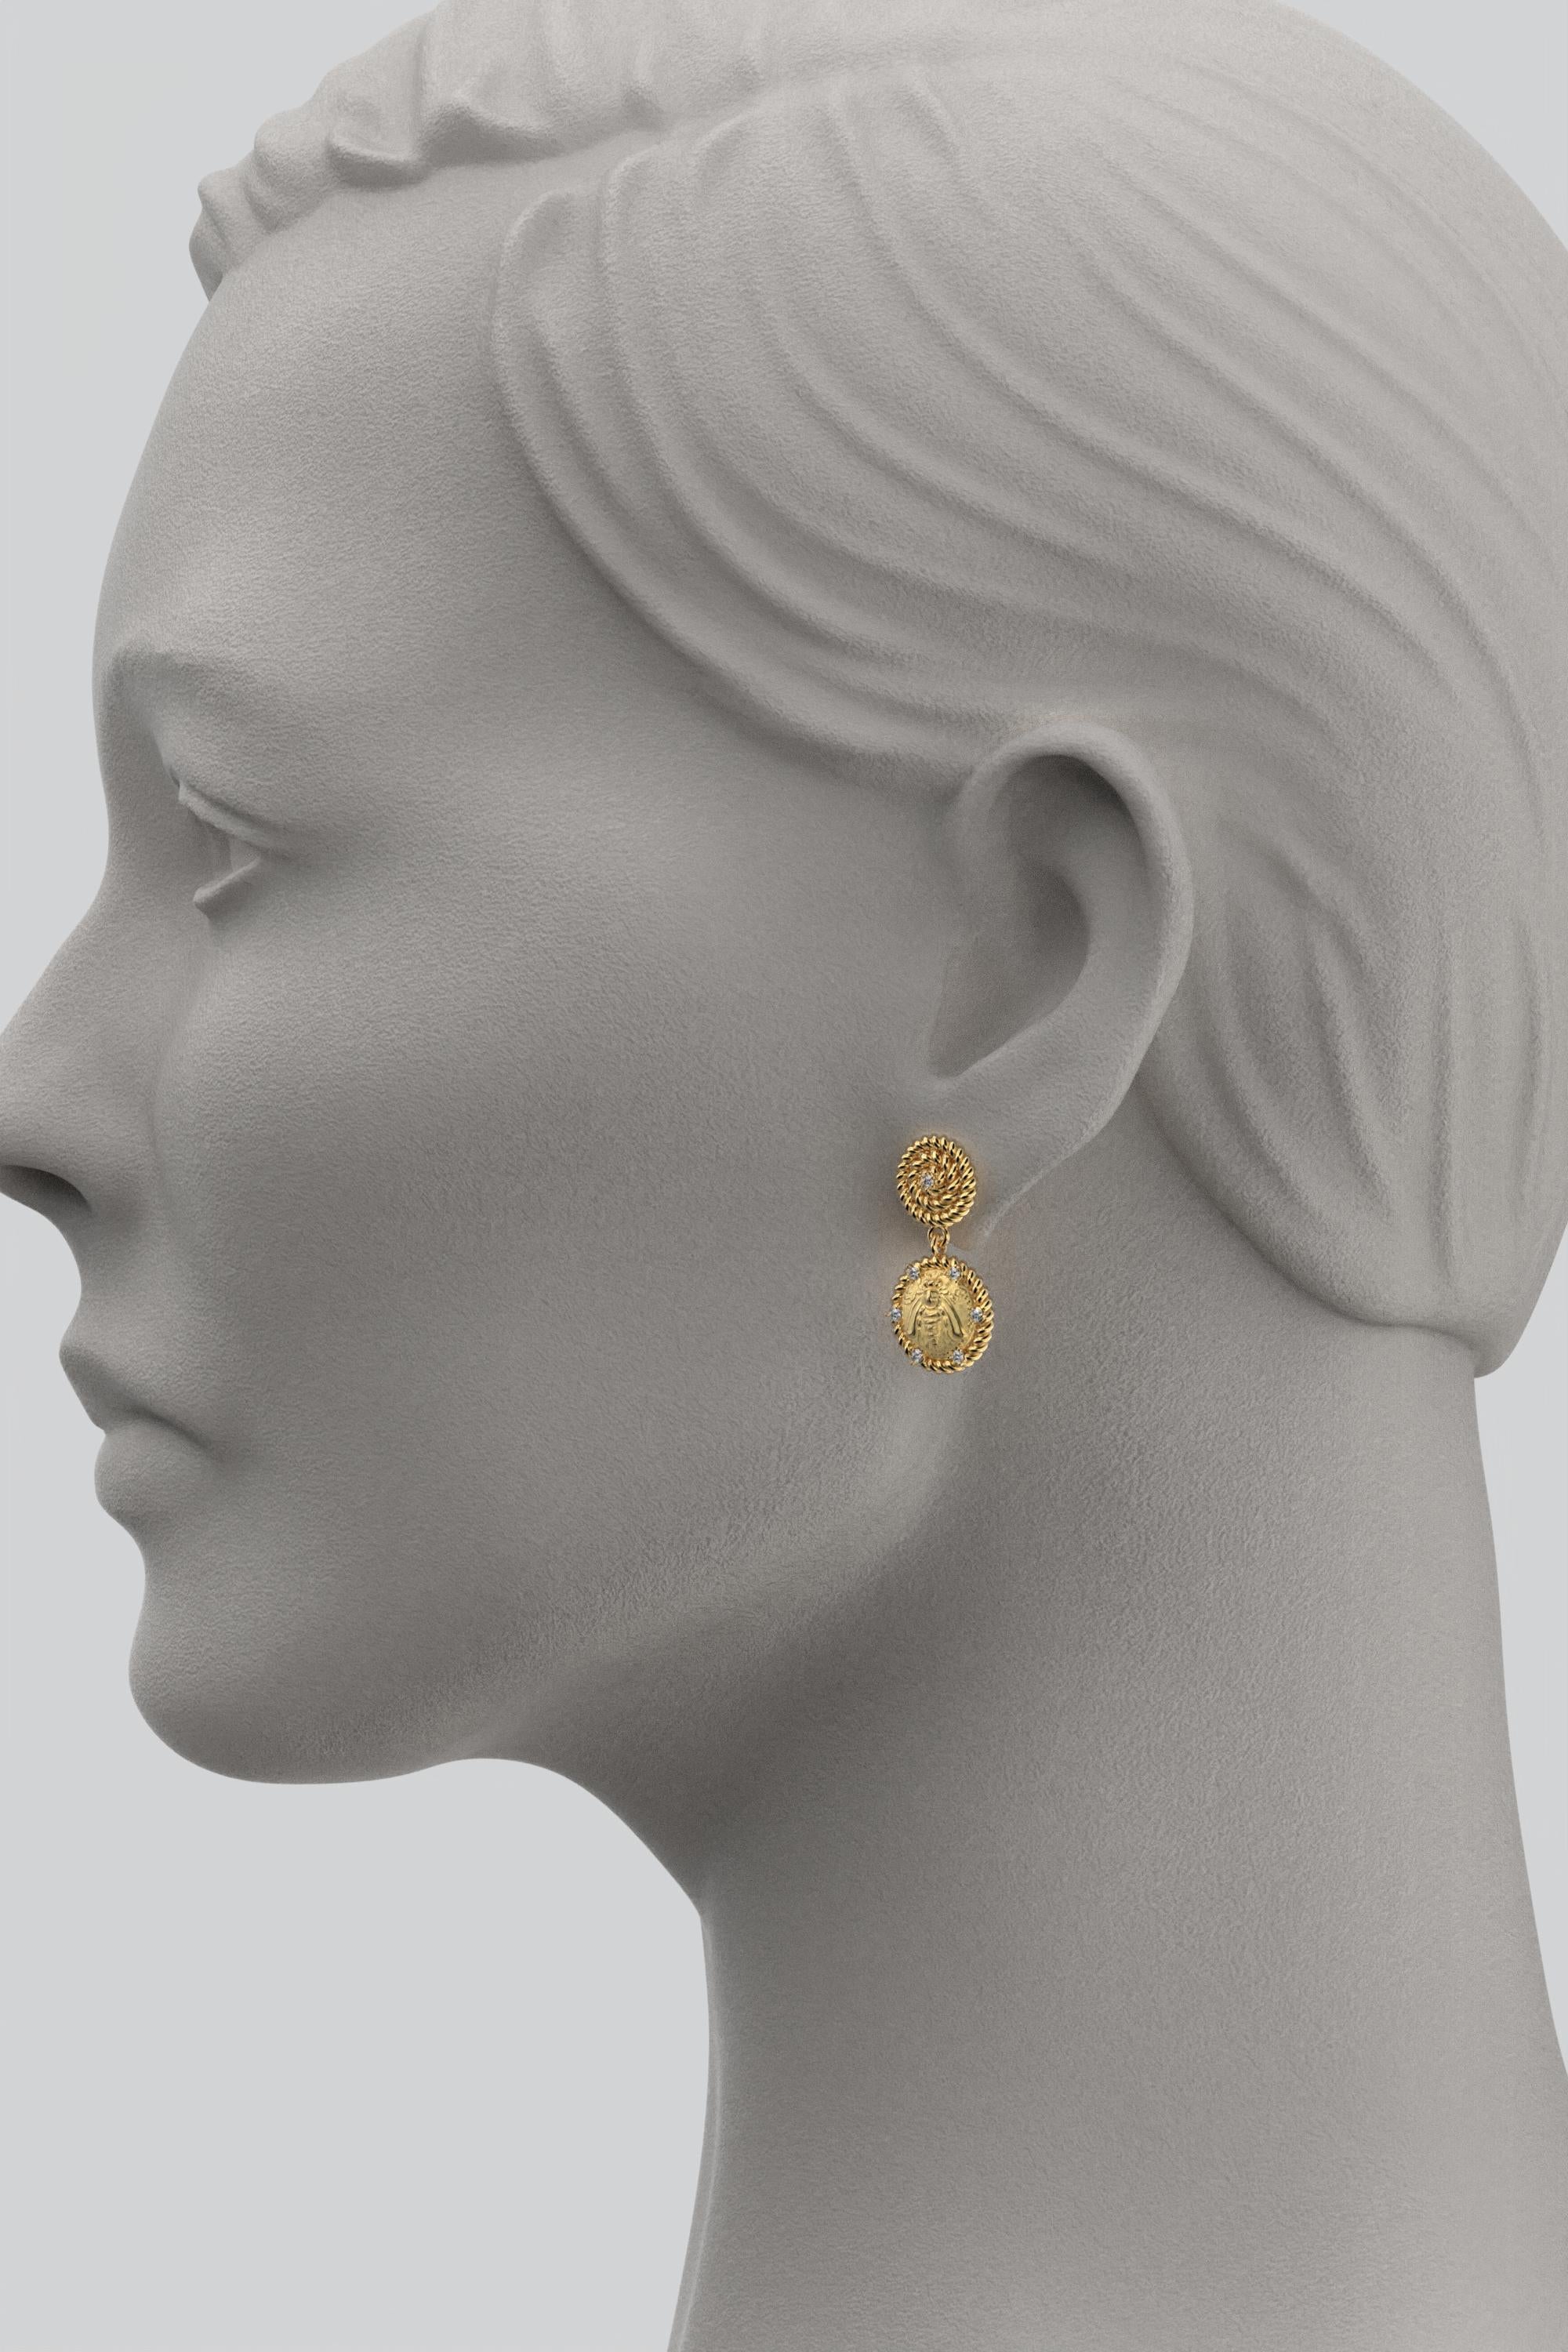 Italian Jewelry | 18k Gold Dangle Earrings With Diamonds | Bee Earrings  In New Condition For Sale In Camisano Vicentino, VI